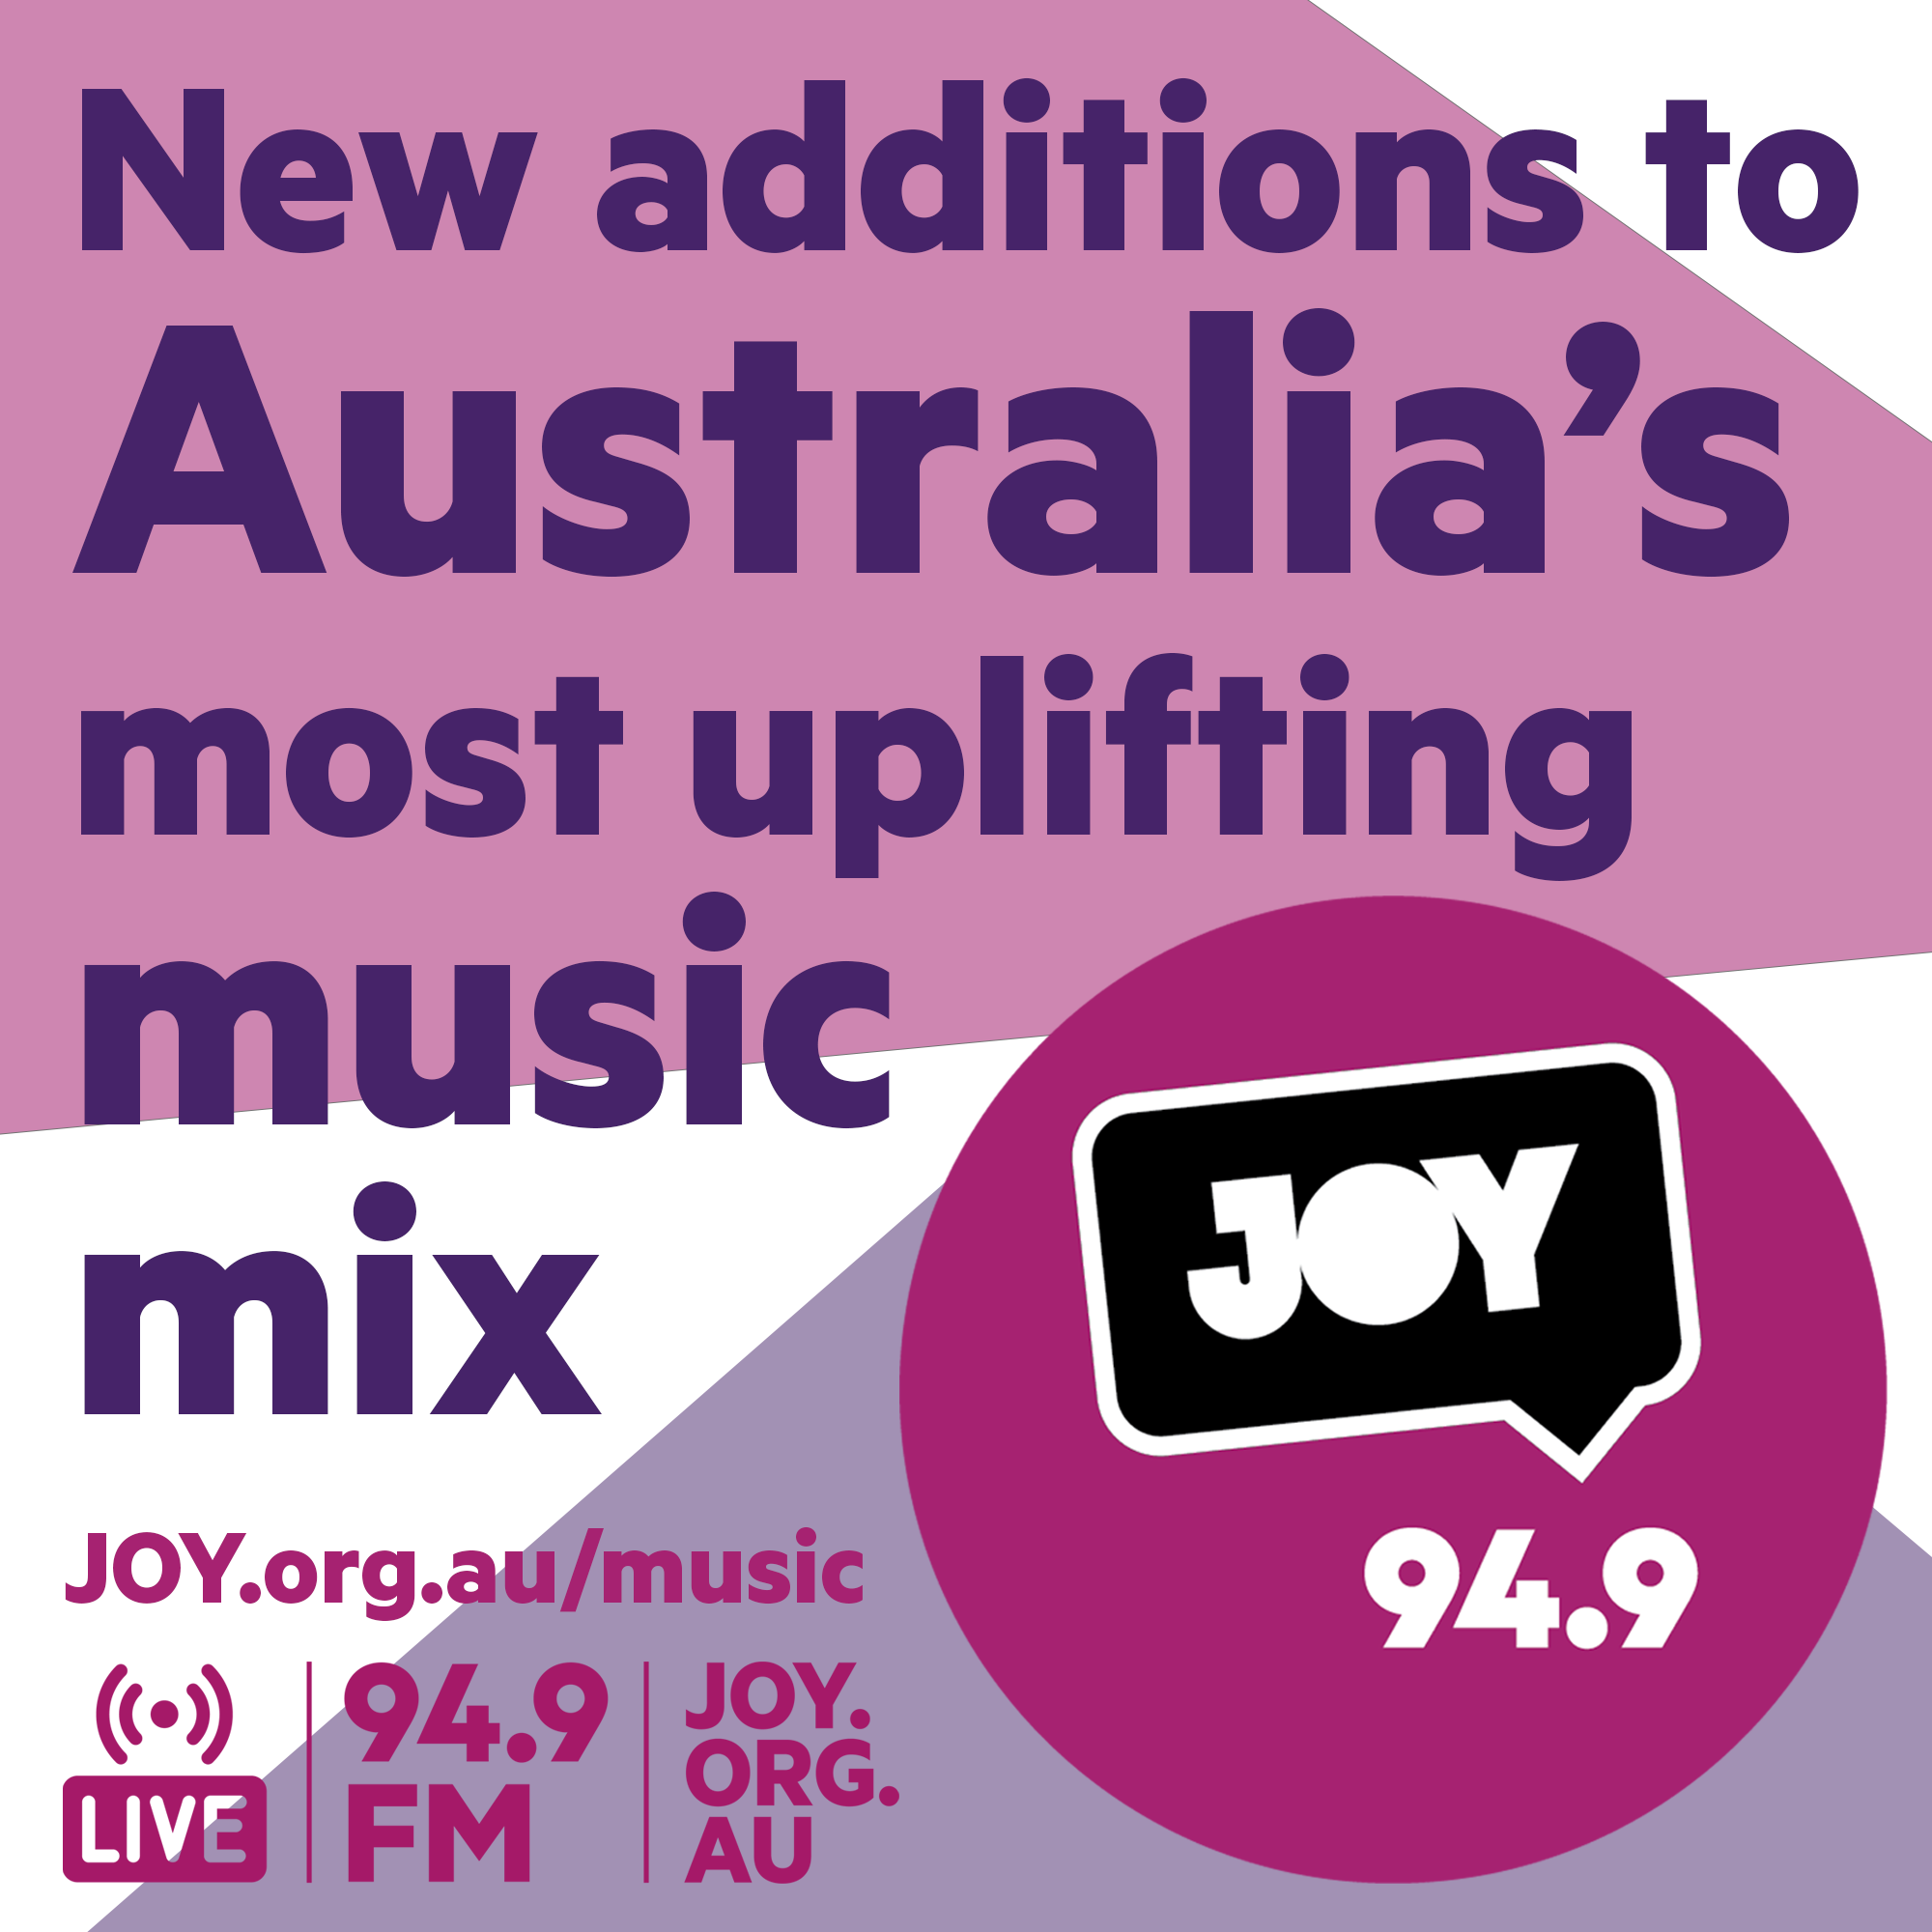 The newest songs to Australia’s most uplifting music mix: 9 March 2022